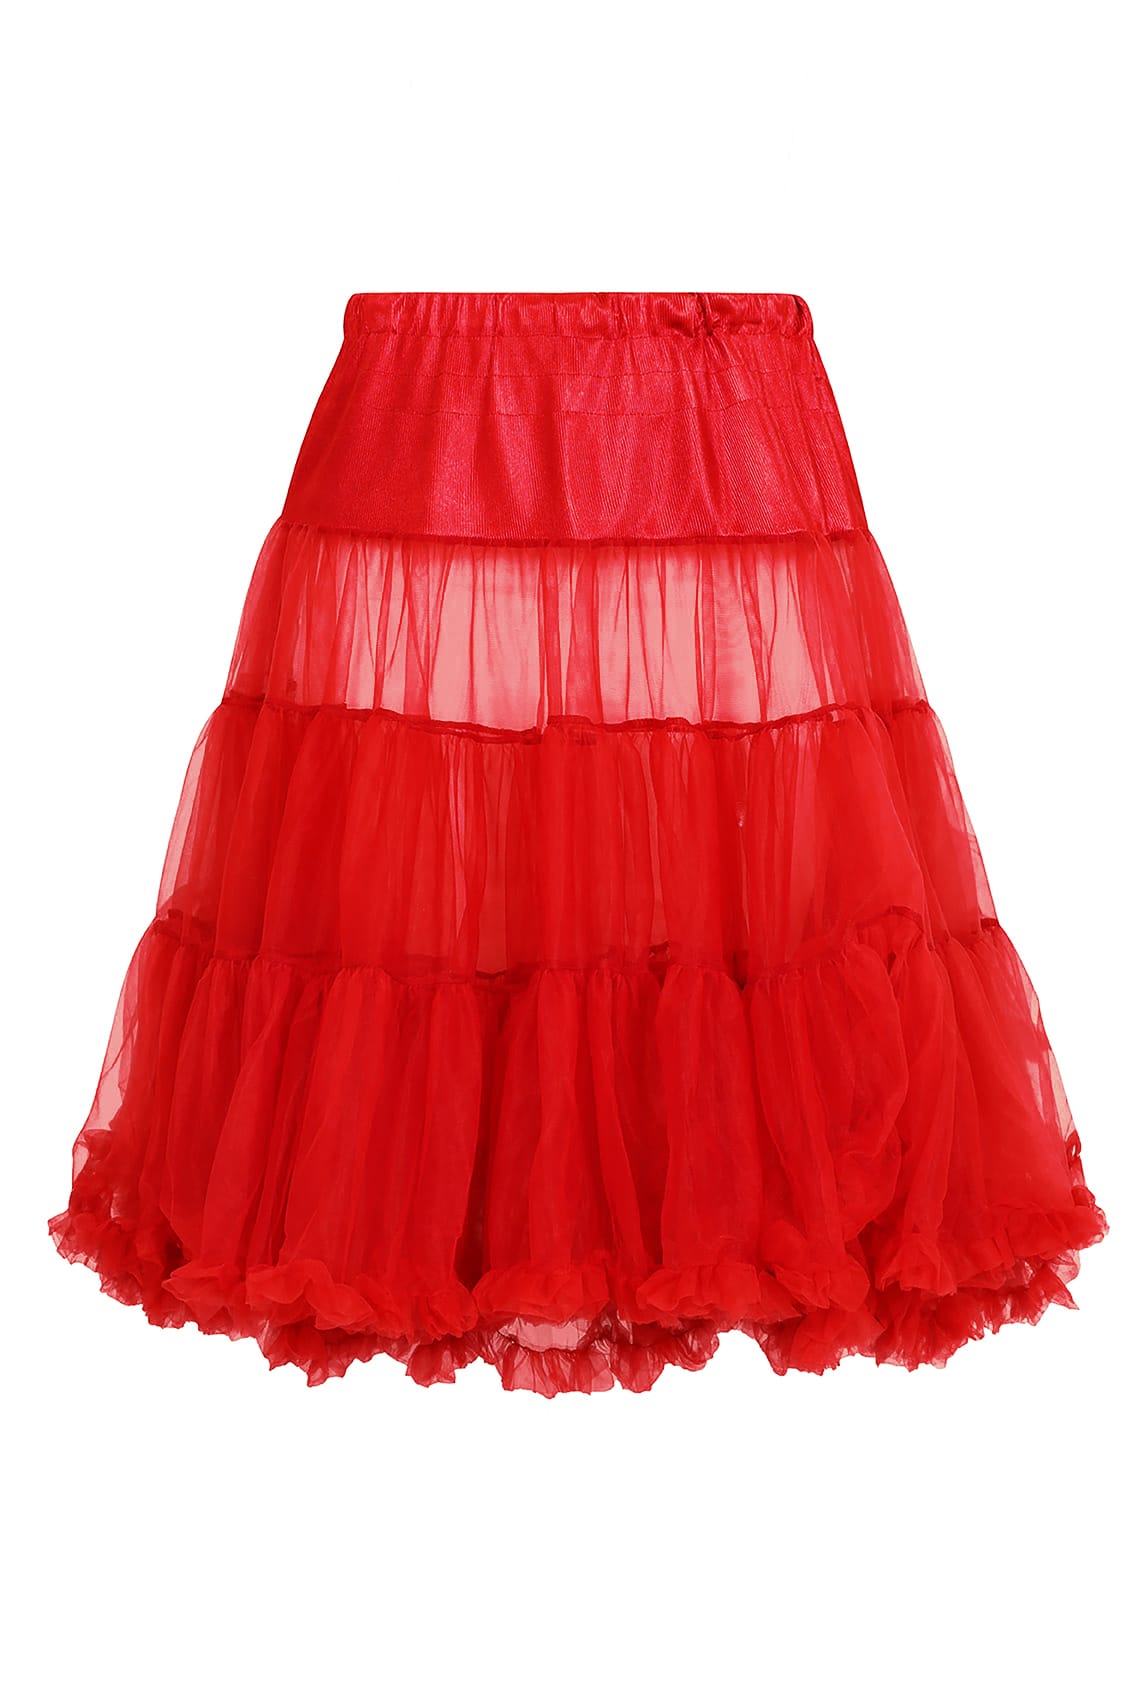 HELL BUNNY Red Petticoat Flare Skirt, Plus size 16 to 32